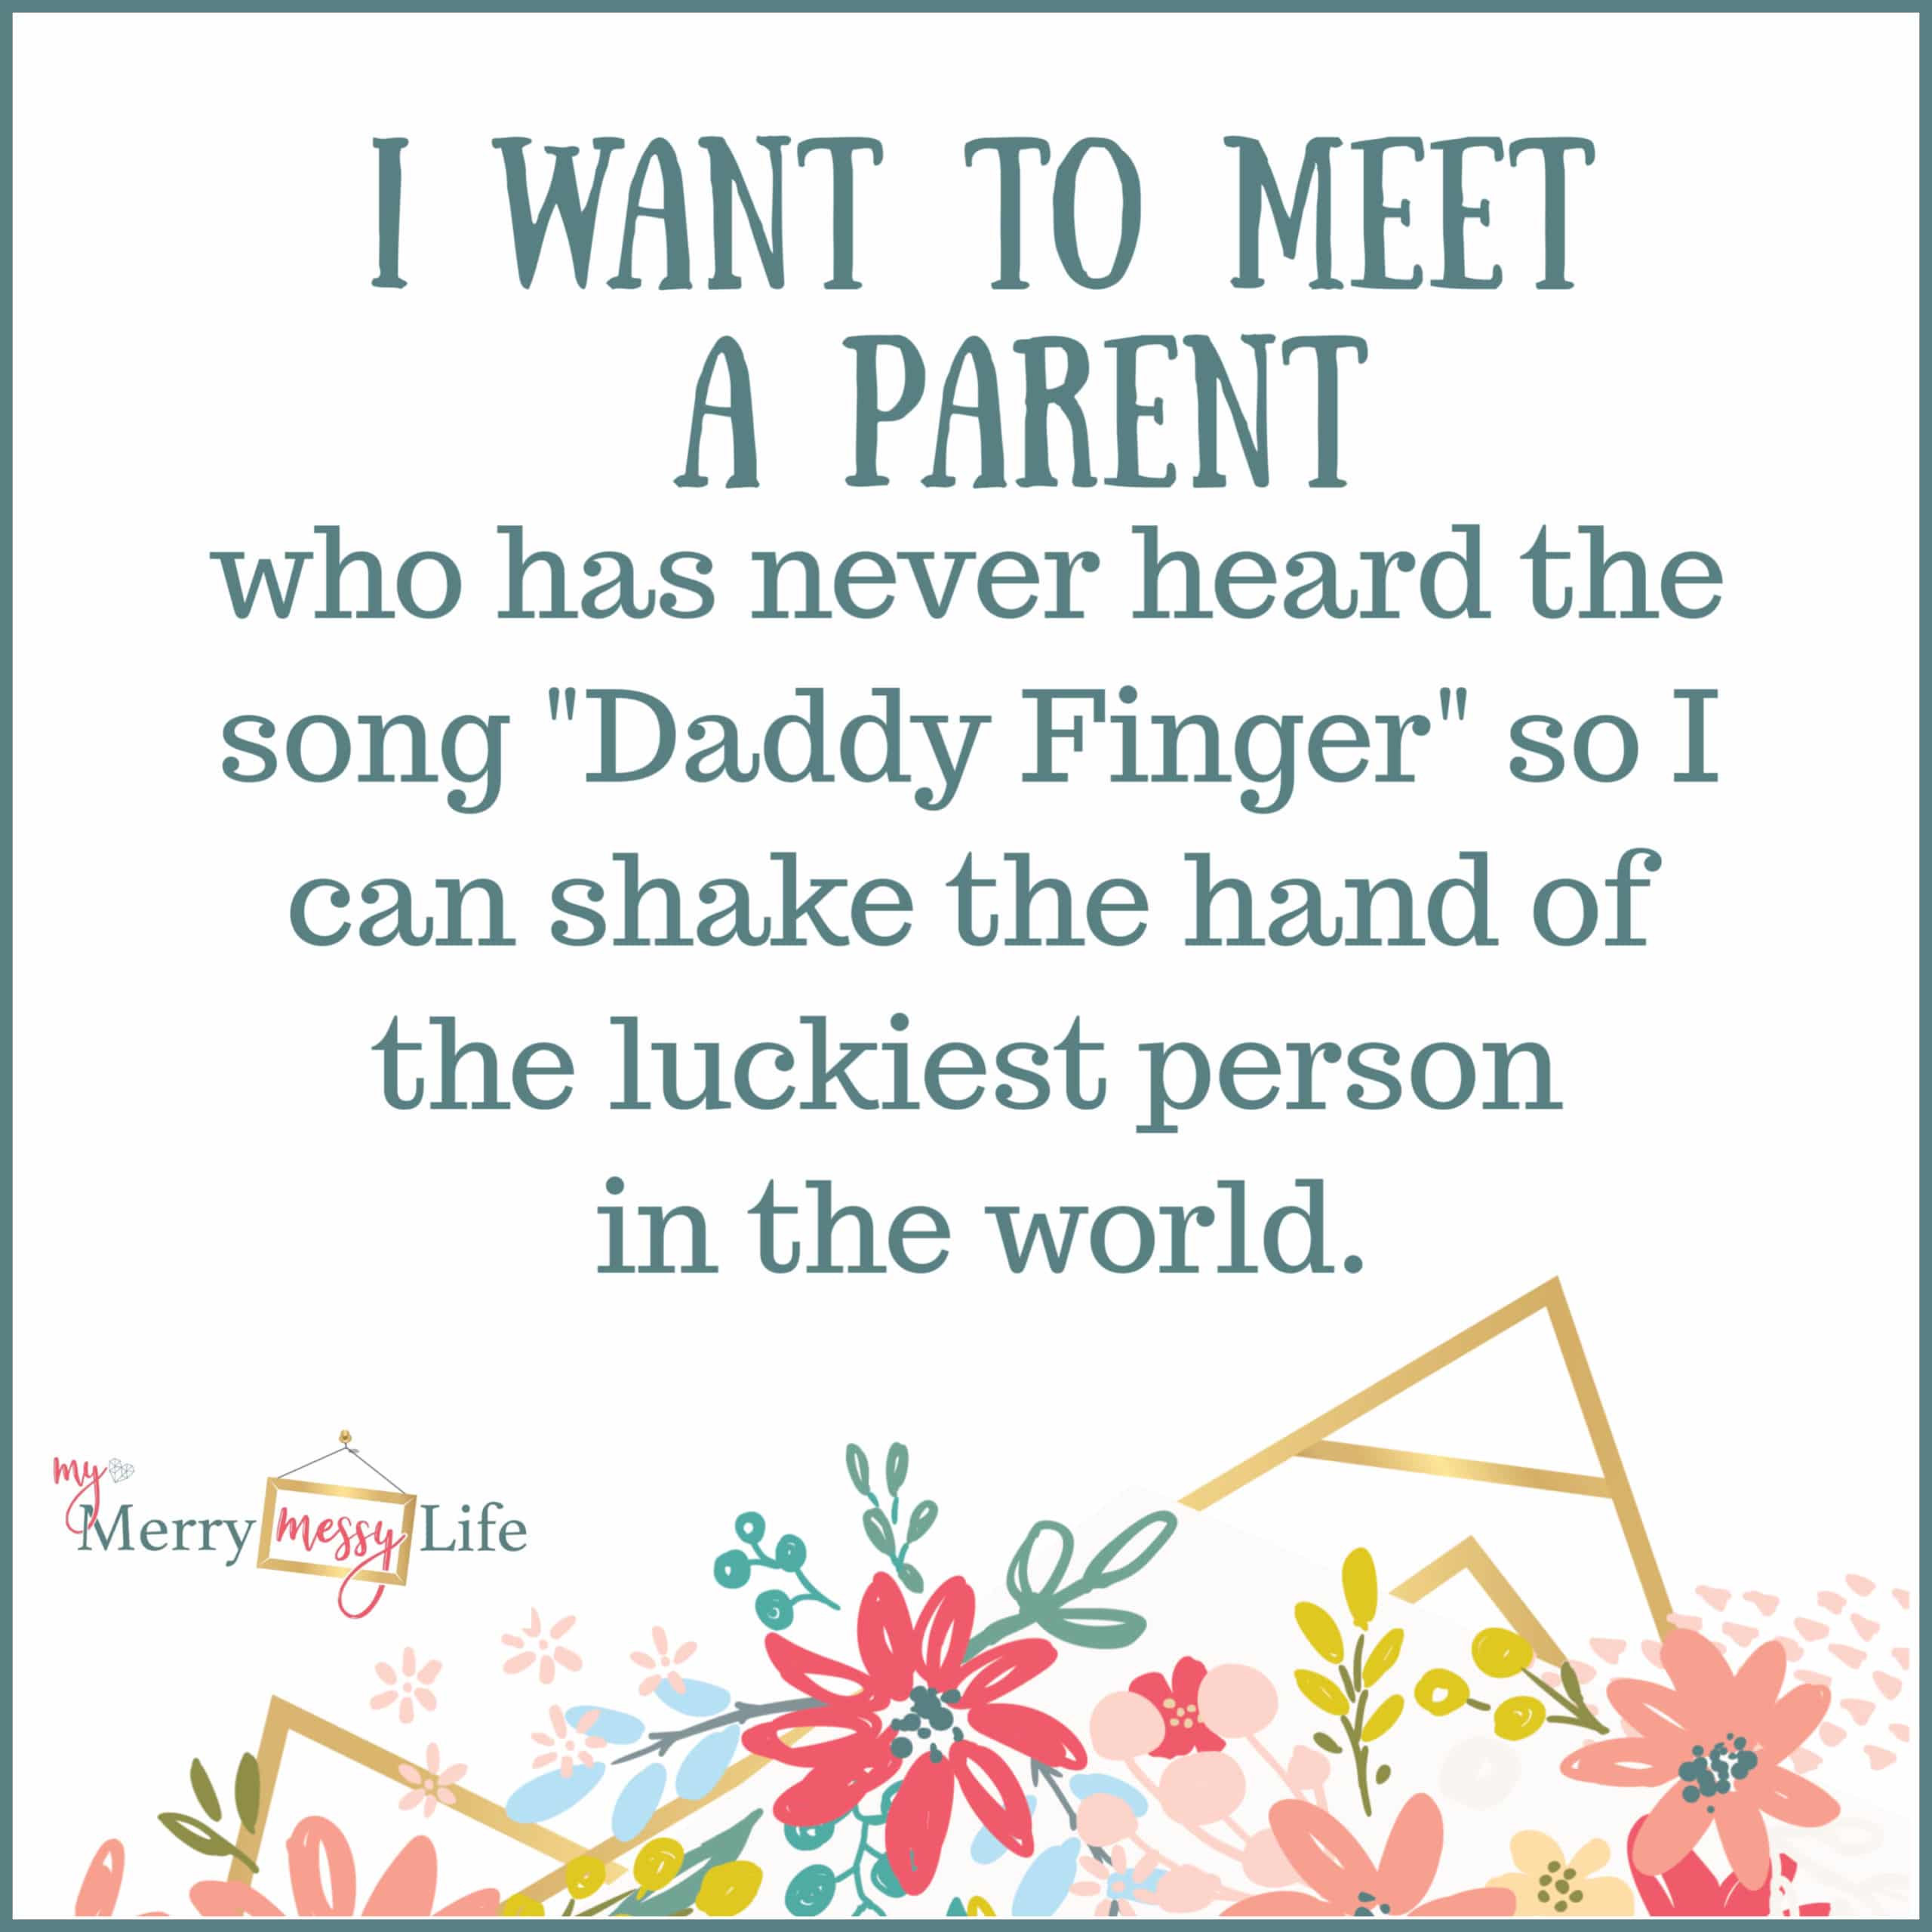 I want to meet the parent who has never heard the song "Daddy Finger" so I can shake the hand of the luckiest person in the world. - Funny Mom Memes about Toddlers